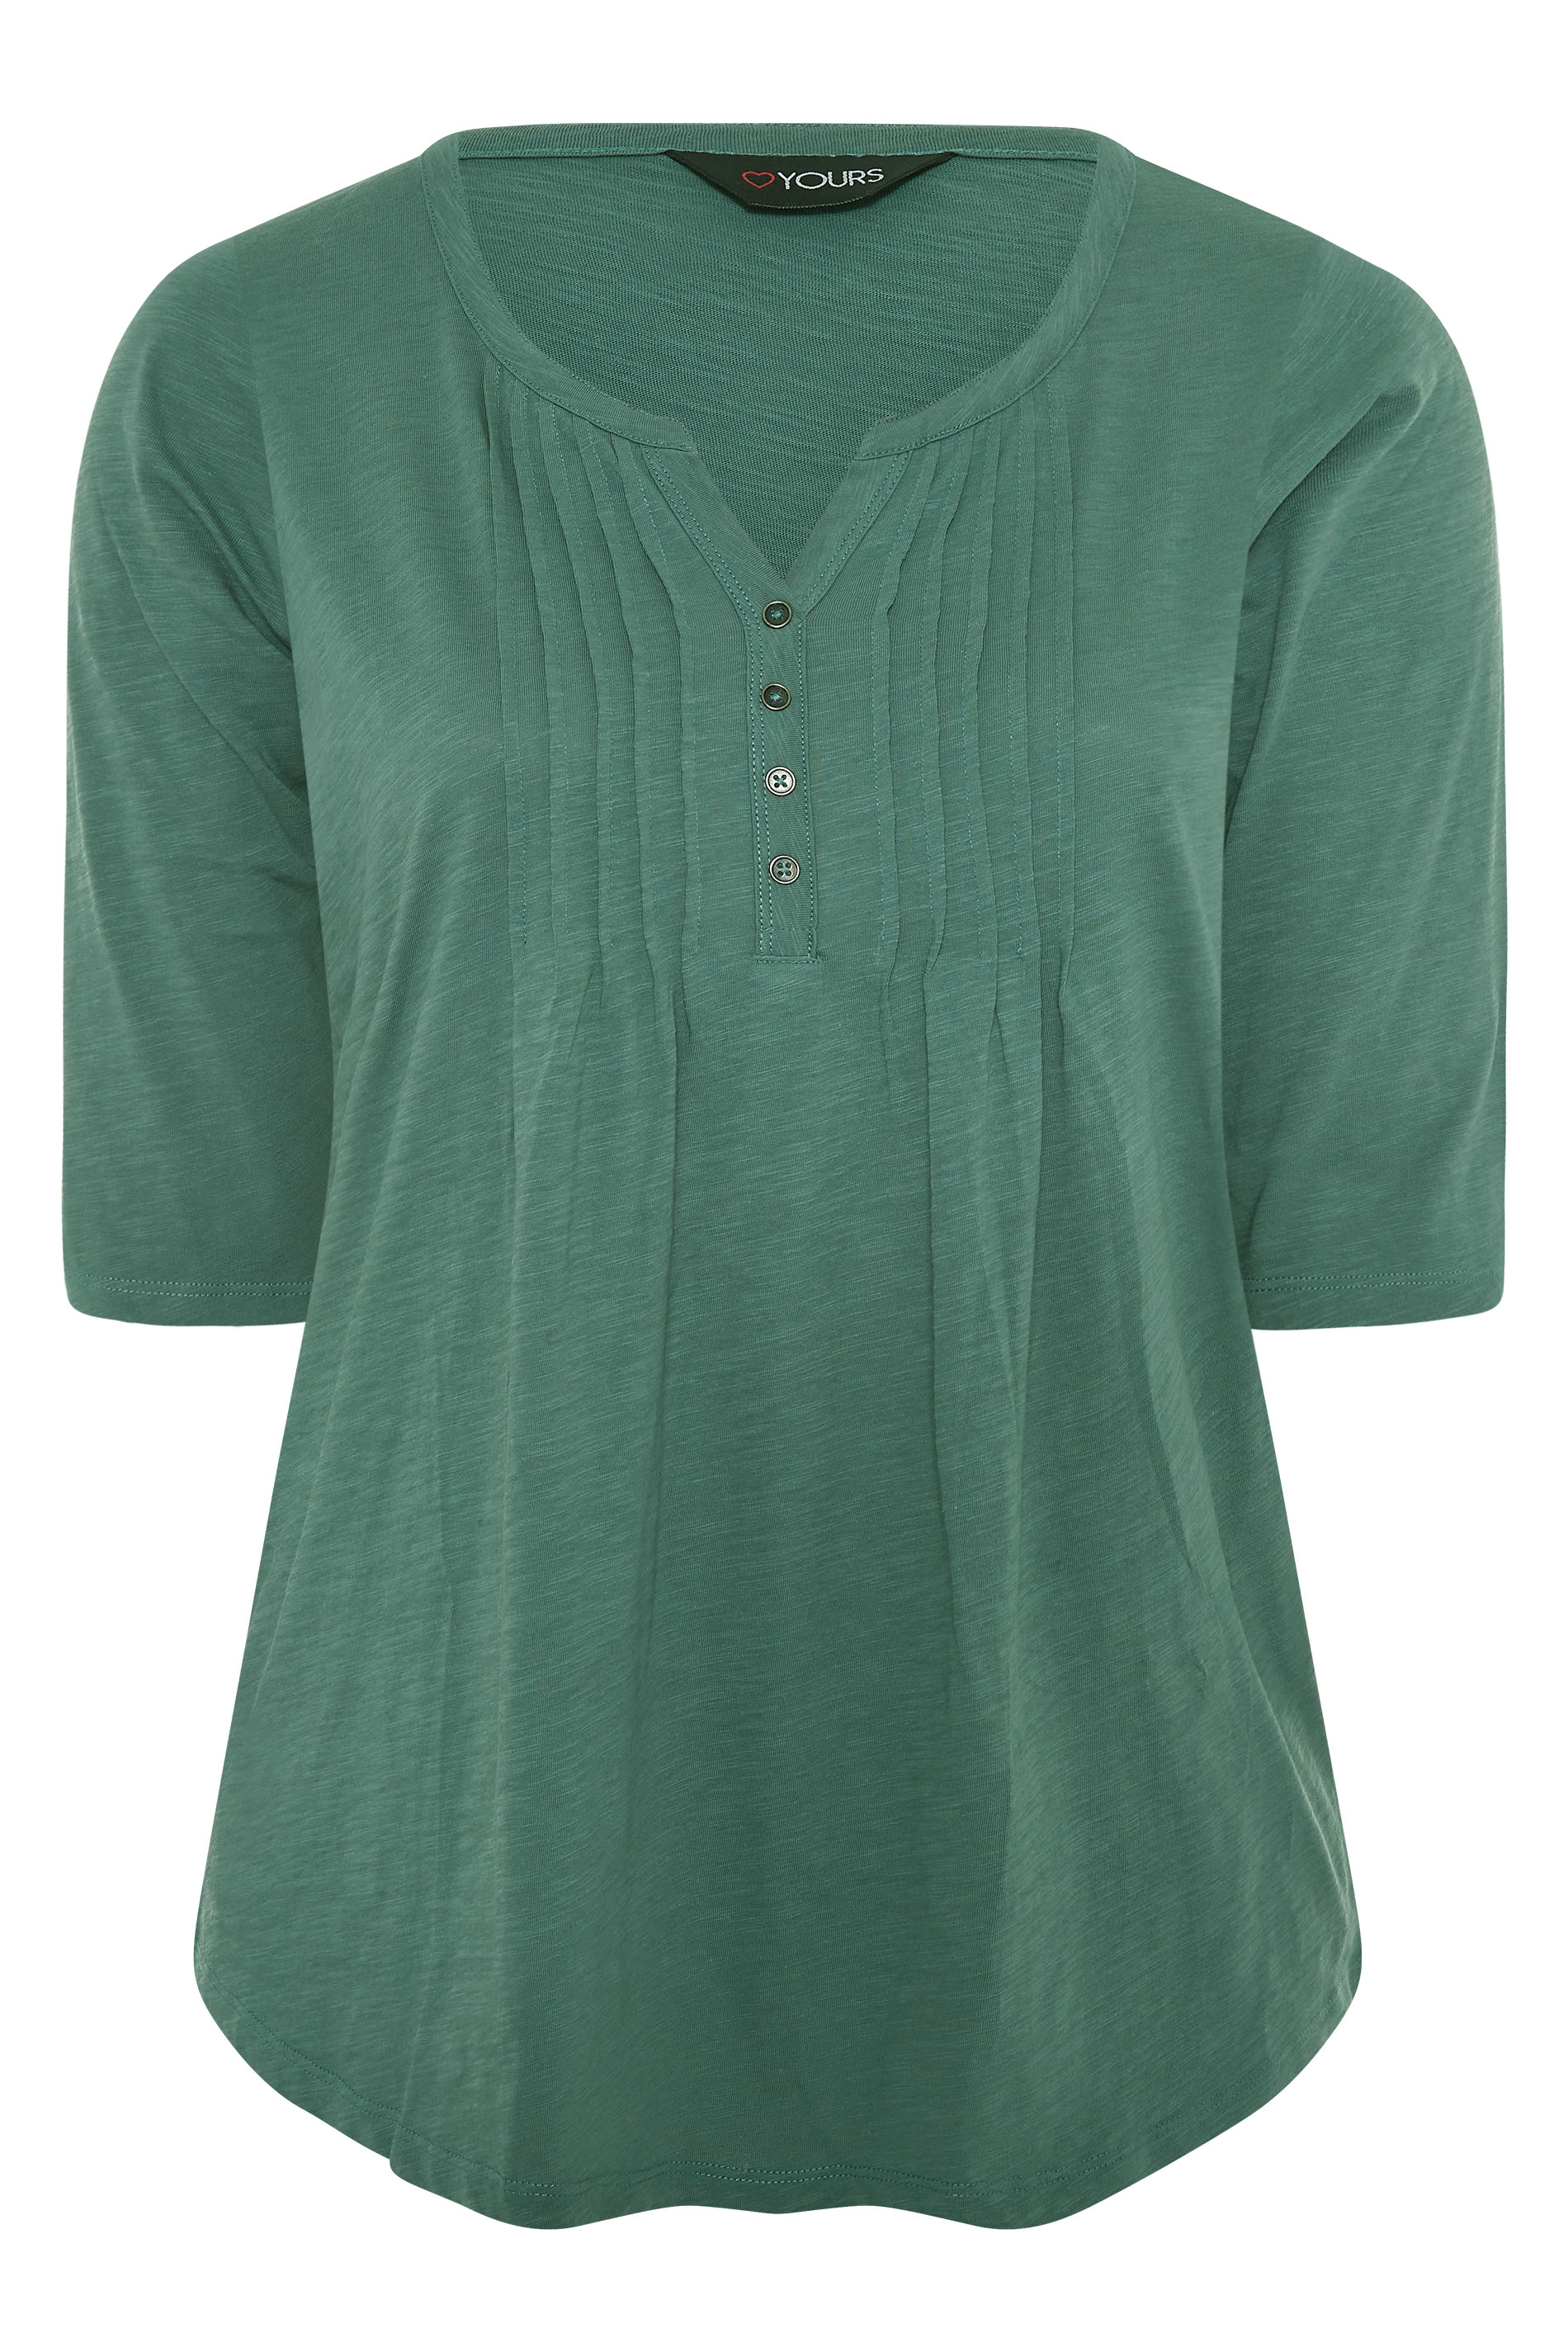 Grande taille  Tops Grande taille  Tops Casual | YOURS FOR GOOD - Top Vert Pastel Volanté - IU07585